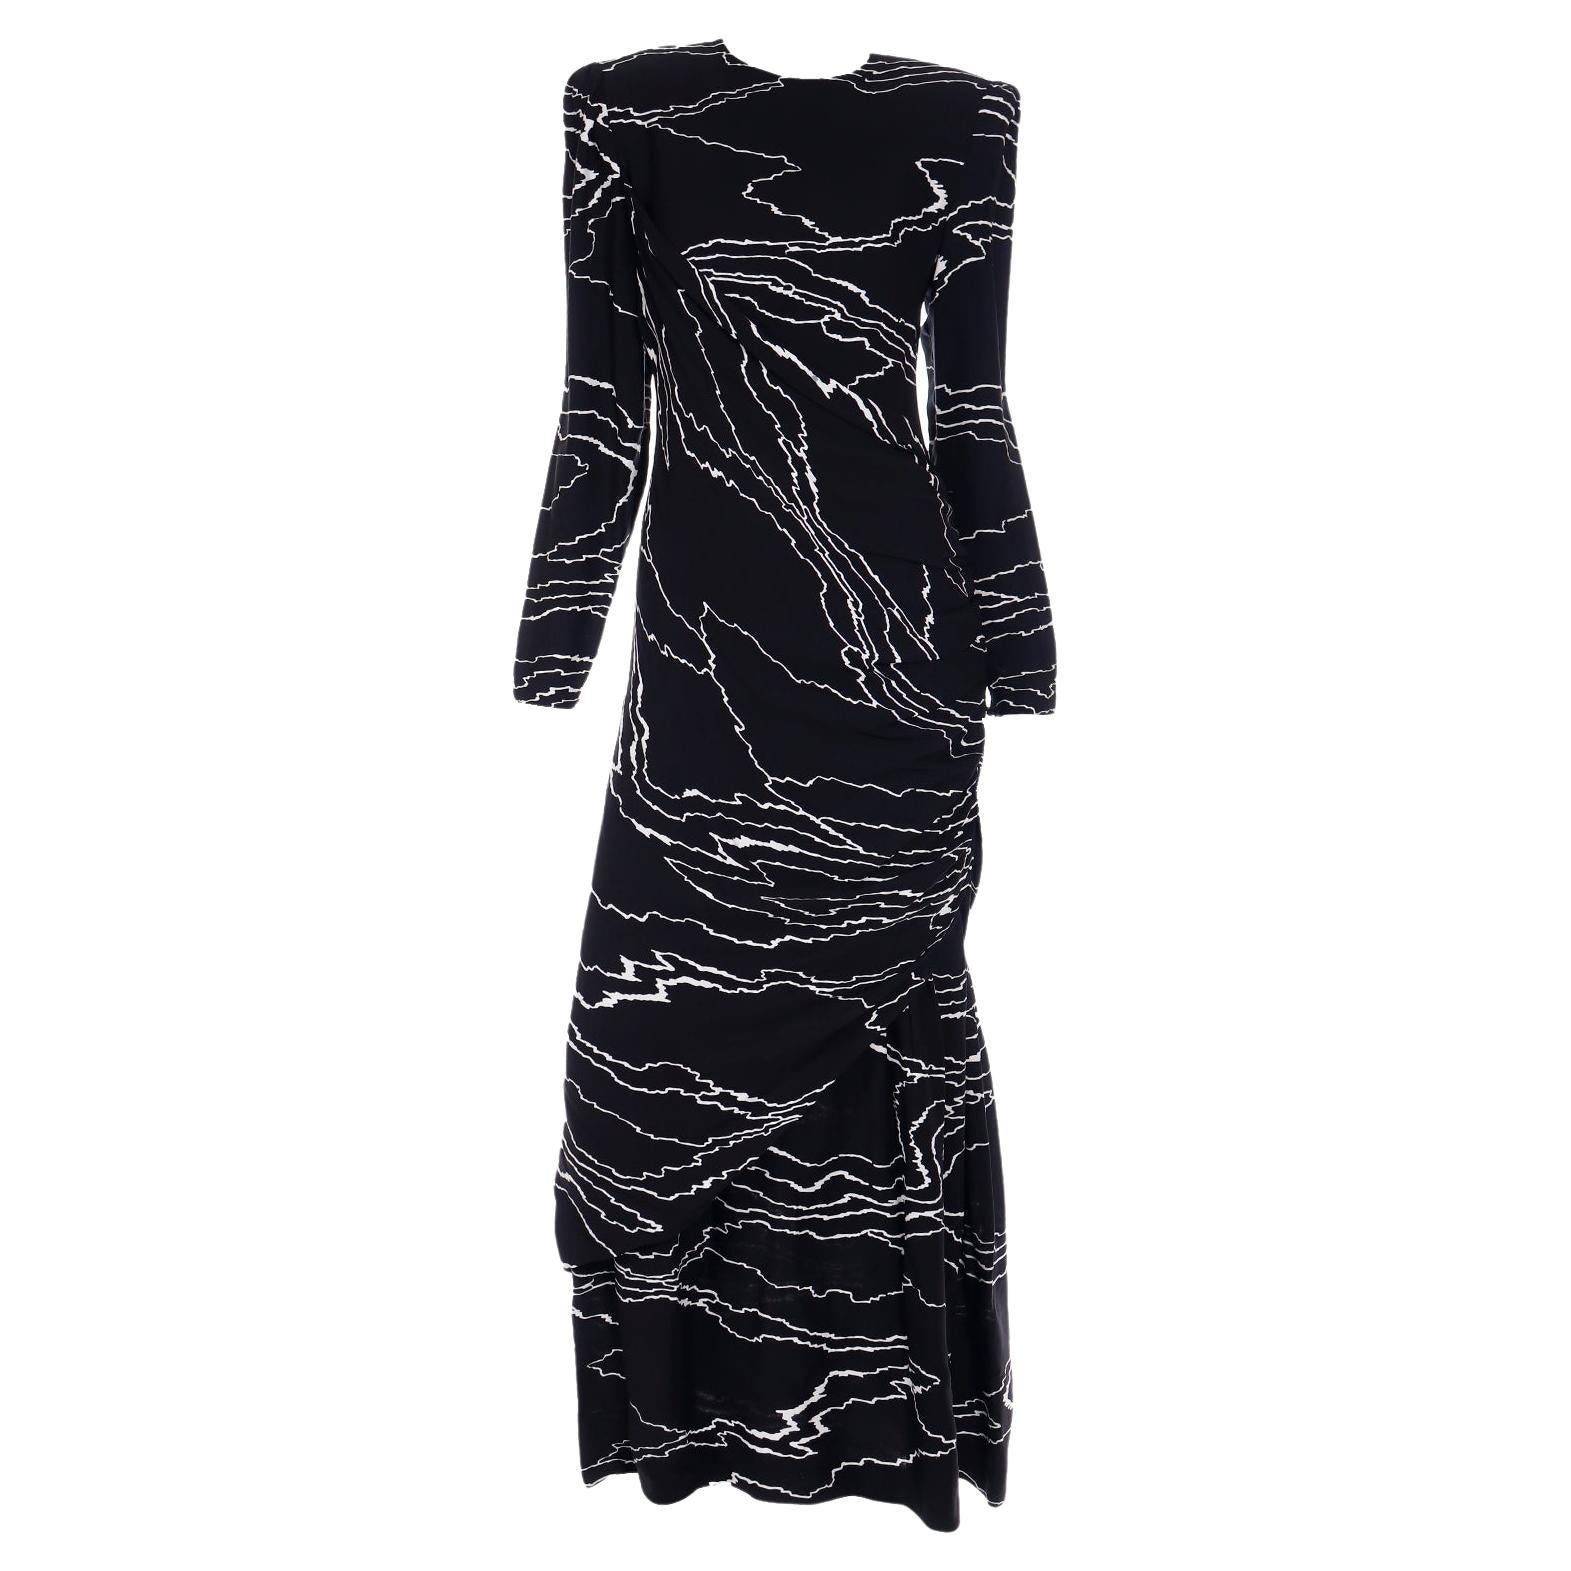 1985 Bill Blass Vintage Runway Dress Abstract Black White Evening Gown Draping For Sale